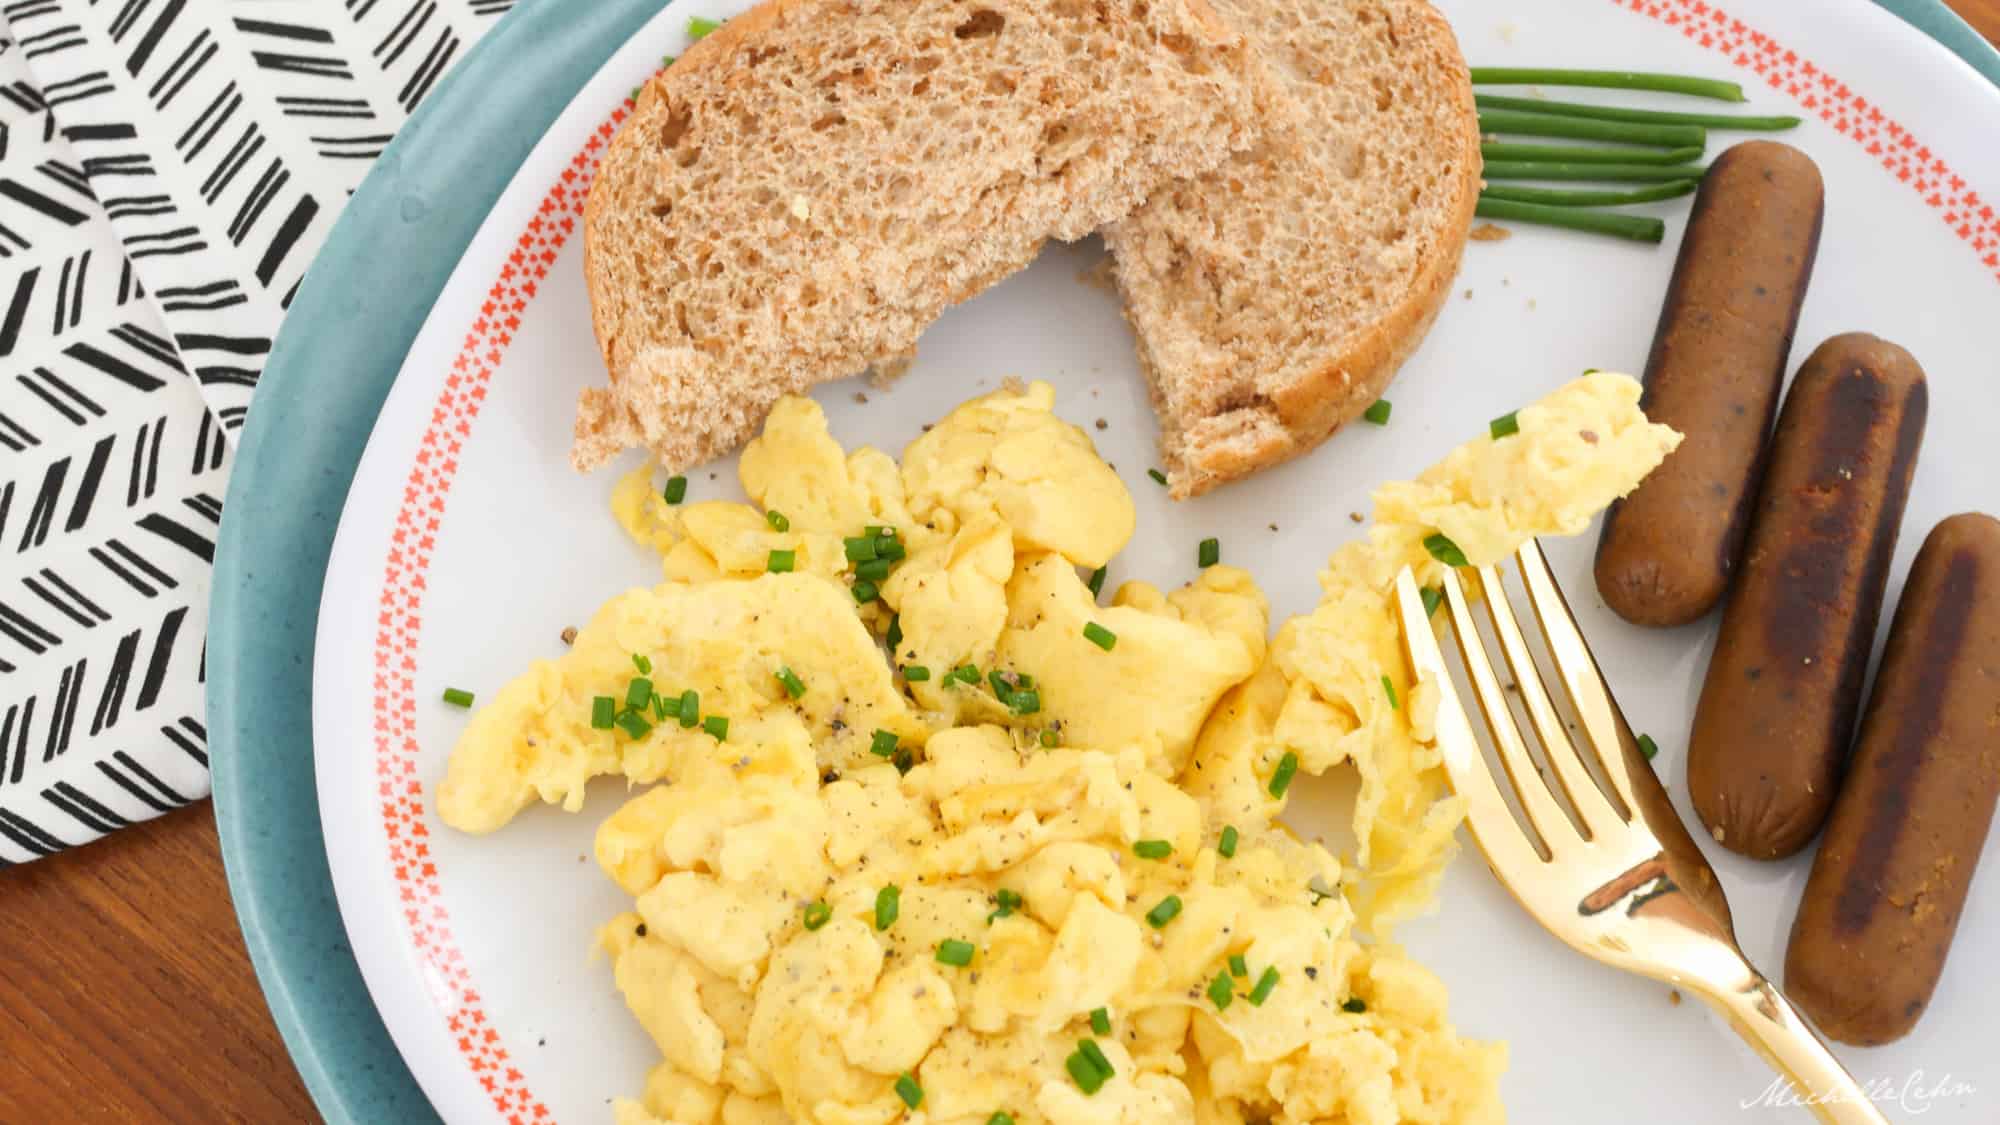 Vegan Eggs Are Finally Here—Watch the New “Just Egg” Scramble